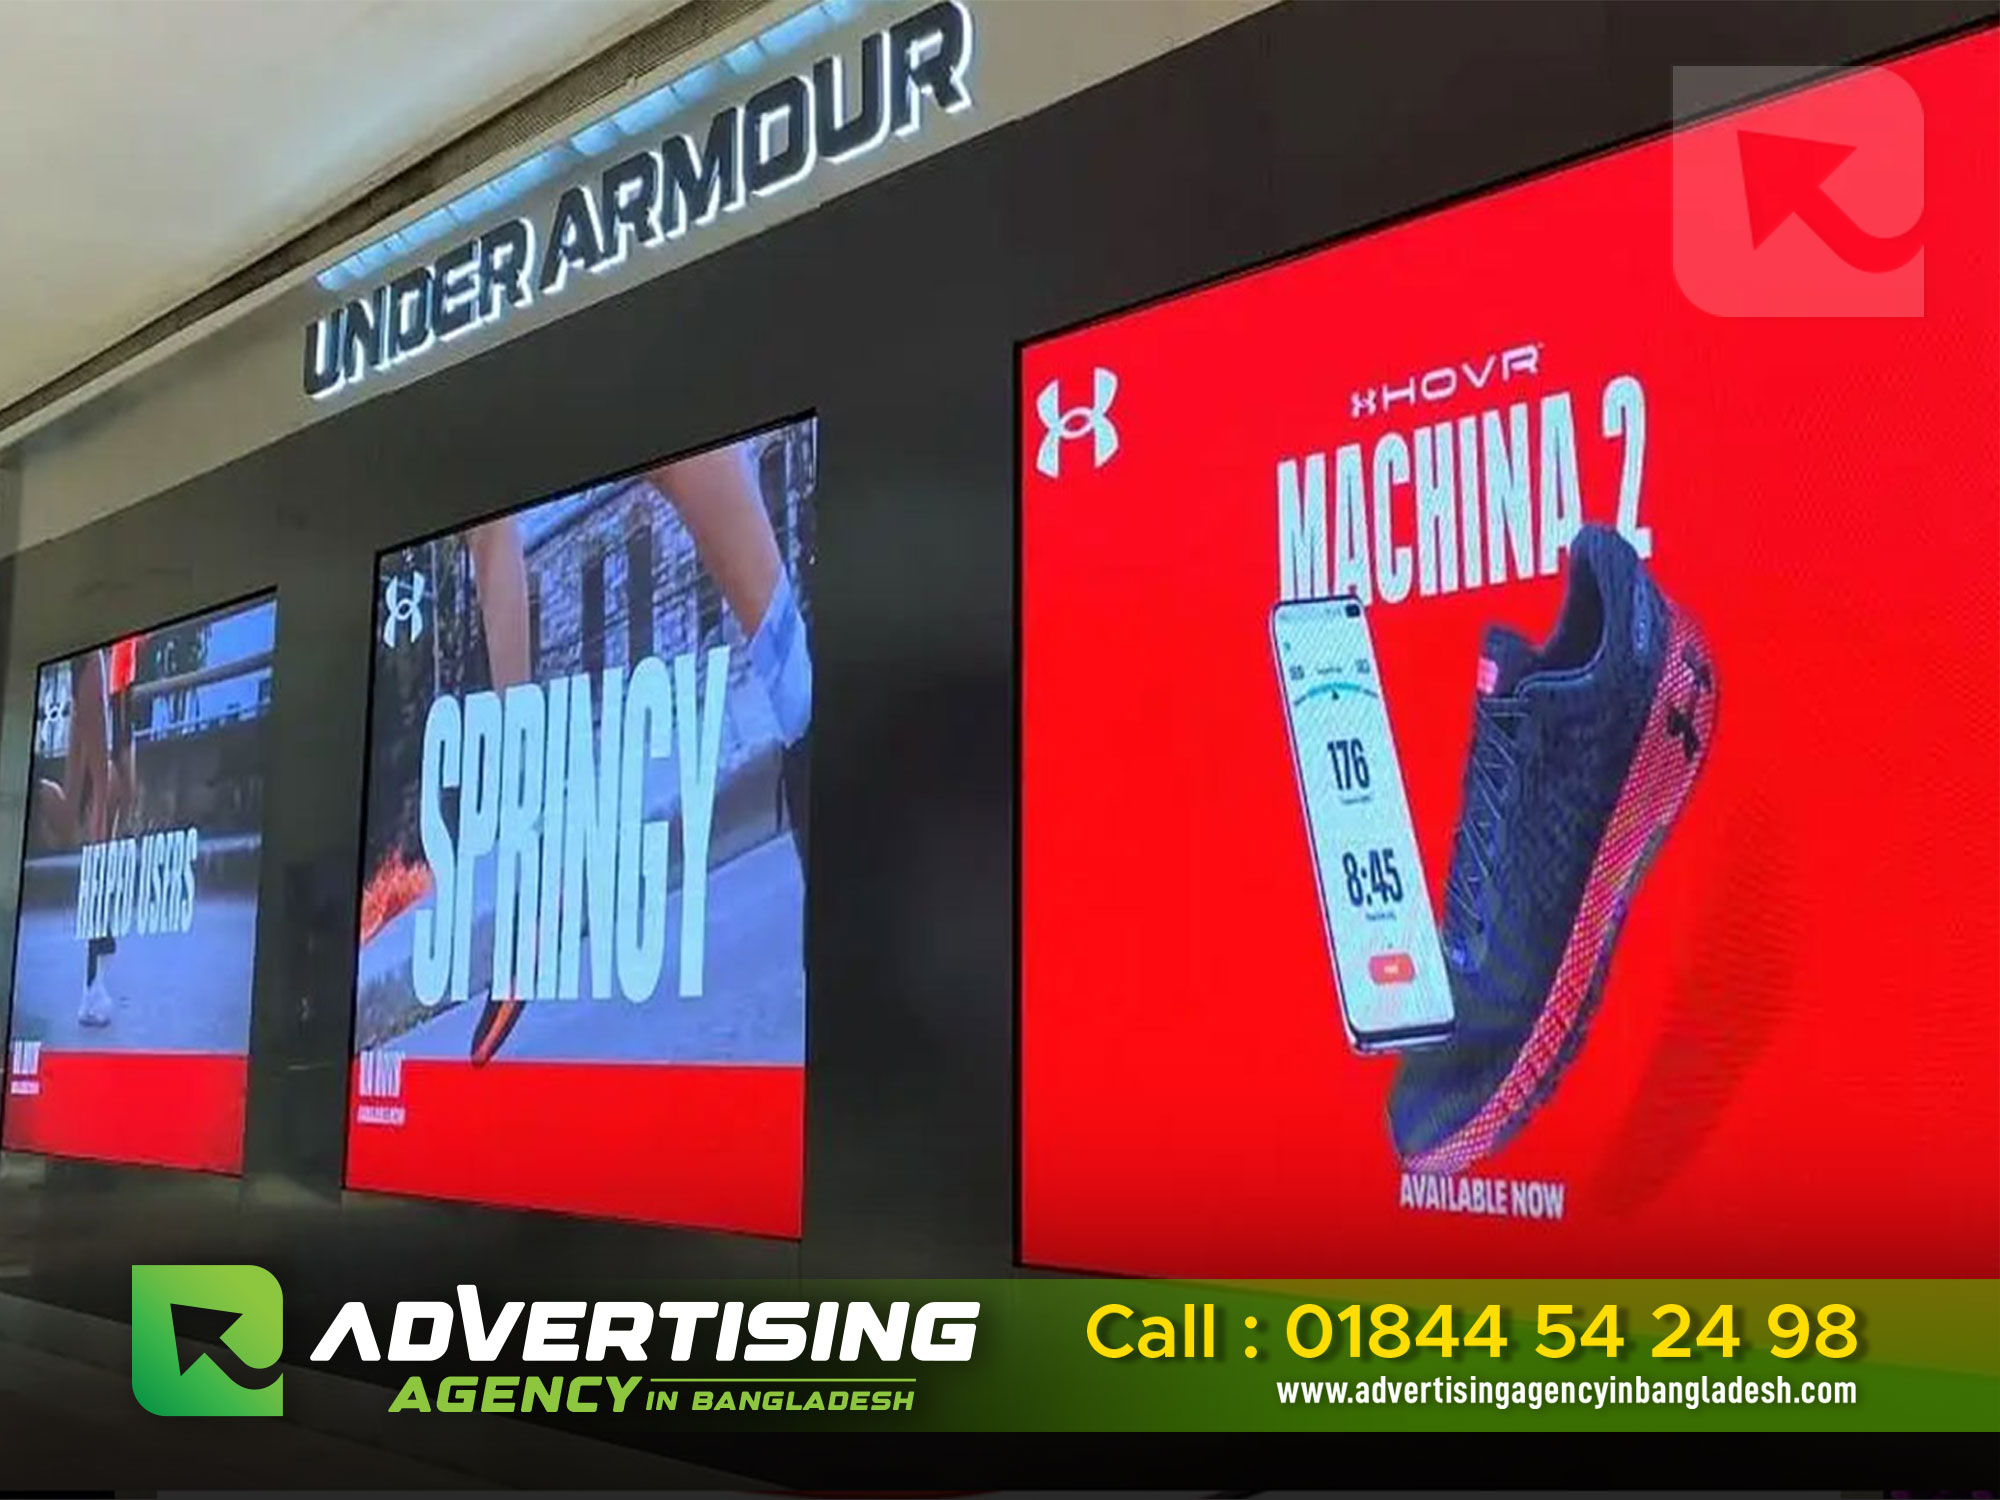 Moving Display Outdoor LED Display Price in Bangladesh Outdoor LED displays have revolutionized the advertising industry by providing a dynamic and eye-catching platform to convey messages to a wide audience. With the increasing popularity of outdoor advertising in Bangladesh, businesses are seeking efficient and cost-effective solutions to promote their products and services. In this article, we will explore the benefits of outdoor LED displays, discuss the price range of outdoor LED displays in Bangladesh, and provide valuable insights into effective outdoor advertising strategies. Moving Display Outdoor LED Display Price in Bangladesh Moving Display Outdoor LED Display Price in Bangladesh One of the primary advantages of outdoor LED displays is their high visibility, even from a distance. These displays utilize bright and vibrant LED lights, ensuring that advertisements are easily noticeable, especially in crowded areas. The captivating visuals and motion graphics displayed on LED screens create a lasting impact on viewers, increasing brand recall and message retention. Outdoor LED Display Price in Mirpur Unlike static billboards, outdoor LED displays allow for dynamic content that can be updated remotely and in real-time. This flexibility enables businesses to showcase multiple messages, promotions, and advertisements throughout the day, maximizing the effectiveness of their campaigns. LED displays can also be programmed to display different content based on specific time frames or targeted audiences, ensuring tailored communication. While the initial investment for an outdoor LED display may be higher than traditional billboards, the long-term cost-effectiveness and return on investment (ROI) are significant. LED displays are energy-efficient, requiring less power consumption compared to traditional lighting methods. Additionally, the ability to update content remotely eliminates the cost of printing and installing new advertisements, making LED displays cost-efficient in the long run. Outdoor LED Display Price in Bangladesh Outdoor LED displays provide businesses with the opportunity to target specific locations and demographics effectively. By strategically placing LED displays in high-traffic areas or areas where the target audience is more likely to be present, businesses can ensure their message reaches the right people at the right time. The ability to display customized and targeted advertisements allows for greater engagement and higher conversion rates. The price of outdoor LED displays in Bangladesh can vary depending on several factors, including size, resolution, quality, and additional features. It is essential for businesses to consider these factors before making a purchase decision. Moving Display Outdoor LED Display Price in Bangladesh Moving display outdoor led display remote control When comparing outdoor LED display options, it’s crucial to evaluate the quality of the display, including the brightness and color accuracy. Higher-quality displays often come at a higher price but offer better visibility and durability. Additionally, businesses should consider the resolution of the LED display to ensure that the content appears sharp and clear, even from a distance. The size of the LED display is another critical factor influencing the price. Larger displays require more LED modules, resulting in higher costs. However, it’s essential to strike a balance between size and viewing distance to ensure optimal visibility and impact. Choosing a Billboard Advertising Company in Bangladesh Moving Display Outdoor LED Display Price in Bangladesh In Bangladesh, the price of outdoor LED displays typically ranges from [Insert Price Range]. It is recommended that businesses reach out to reputable suppliers or consult with experts to get accurate pricing based on their specific requirements. When investing in outdoor LED displays, selecting the right billboard advertising company is crucial to ensure a successful advertising campaign. Here are some factors to consider when choosing a company: Experience and Reputation: Look for companies with a proven track record and positive customer reviews. An experienced company will have the expertise to handle the installation, maintenance, and content management of outdoor LED displays effectively. Quality of Service: Assess the company’s customer service and support. A reliable advertising company should provide prompt assistance and address any issues or concerns promptly. Billboard Advertising Cost in Bangladesh The cost of billboard advertising in Bangladesh can vary based on several factors, such as location, size, duration, and demand. Here are some key factors that influence the cost: Location: Prime locations with high traffic and visibility will have higher advertising costs. Businesses targeting specific areas should consider the demographic and footfall before finalizing a location. Size and Format: Larger billboards tend to have higher advertising costs. Additionally, the format of the billboard, such as static or digital LED display, can impact the pricing. Duration: The duration of the advertising campaign also affects the cost. Longer campaigns may offer discounted rates compared to short-term campaigns. It is recommended to consult with billboard advertising companies to get accurate cost estimates based on your specific requirements and desired locations. Effective Outdoor Advertising Strategies in Bangladesh To make the most of outdoor LED displays and billboard advertising in Bangladesh, businesses should implement effective strategies to engage the audience and maximize the impact of their campaigns. Here are some tips: Utilizing LED Scrolling Display Boards: LED scrolling display boards offer dynamic and eye-catching content that can attract attention. Utilize the scrolling feature to display multiple messages or promotions effectively. Creating Captivating Billboard Images: Design visually appealing and captivating billboard images that resonate with the target audience. Use high-quality graphics, compelling visuals, and concise messages to convey the intended message quickly. Targeting the Right Locations and Audiences: Conduct thorough research to identify the most relevant and high-traffic locations for your target audience. Consider factors such as demographics, footfall, and proximity to your business location when selecting billboard locations. Measuring the Success of Outdoor Advertising Campaigns: Implement tracking mechanisms to measure the effectiveness of your outdoor advertising campaigns. This can include tracking website traffic, calls, or inquiries generated from the billboard advertisements. By implementing these strategies, businesses can enhance the impact of their outdoor advertising campaigns and achieve their marketing goals effectively. moving display outdoor led display remote LED scrolling display board kits offer a comprehensive solution for businesses looking to incorporate dynamic and engaging content in their advertising campaigns. These kits include LED modules, control systems, power supplies, and necessary accessories for easy installation and operation. LED scrolling display boards allow businesses to display scrolling text, images, and animations, capturing viewers’ attention and delivering messages in a captivating manner. These boards are highly customizable, allowing businesses to adjust the content and display duration based on their requirements. In Bangladesh, LED scrolling display board kits are available from various suppliers and manufacturers. The price of the kits can vary depending on the size, resolution, and additional features. It is advisable to consult with reputable suppliers or experts to find the most suitable kit for your advertising needs. Conclusion Outdoor LED displays and billboard advertising play a significant role in promoting businesses and reaching a wide audience in Bangladesh. The high visibility, flexibility, and cost-effectiveness of LED displays make them a preferred choice for businesses looking to make a lasting impact with their advertising campaigns. By considering the factors influencing the price, selecting the right billboard advertising company, and implementing effective strategies, businesses can leverage the power of outdoor advertising to enhance their brand visibility and attract more customers. Moving display outdoor led display remote Outdoor Advertising In Bangladesh. Digital Billboard Price In Bangladesh. Advertisement বাংলা উচ্চারণ Facebook Advertising. Facebook Advertising Policy. Global Outerwear Ltd. J And Z Group. Jacket Factory In Bangladesh. Marketing Agency In Bangladesh. Moving Display Outdoor LED Display Price in Bangladesh Mosco Marketing Company. Objectives Of Advertising. Old Advertisements Of Bangladesh. Q & Q Trading Limited. Roar Retail. Top Advertising Agency In Bangladesh. Tv Advertising Cost In Bangladesh. Types Of Advertisement. What Is Advertisement. What Is Advertising In Marketing. X Integrated Marketing Agency. Xclusive Can Limited Bangladesh. Z And Z Intimates Ltd. Z&z Intimates Ltd Job Circular. Commercial Electricity Bill Rate Per Unit In Bangladesh 2021. Facebook Boosting Cost In Bangladesh. Gas Bill Per Month Bangladesh. Newspaper Advertisement Rates In Bangladesh. Ribbon Price In Bangladesh. T Bill Rate In Bangladesh. Top Advertising Agency In Bangladesh. Tv Advertising Cost In Bangladesh. Video Editor Salary In Bangladesh. Newspaper Advertisement Rates In Bangladesh. Old Advertisements Of Bangladesh. Top Advertising Agency In Bangladesh. Tv Advertising Cost In Bangladesh. Newspaper Advertisement Rates In Bangladesh. Moving Display Outdoor Display Price in Bangladesh Old Advertisements Of Bangladesh. Top 10 Advertising Agency In BD. Tv Advertising Cost In Bangladesh. Youtube Advertising in bd. Display Meaning In Bengali. 9s Led Headlight Price In Bangladesh. Display Meaning In Bengali. G360 Lcd Light Solution. Keep Moving Watch Price In Bd. Lcd Polarizer Film Price In Bangladesh. Lcd ও Led এর মধ্যে পার্থক্য. Best Outdoor Led Display Screen Price In BD. Programmable Scrolling Moving Led Message Sign Display. Relisys Monitor Price In Bangladesh. Rgb Led Strip Light Price In Bangladesh. Rgb Led Strip Price In Bd. Vision Led Clock. Display Outdoor Price in Bangladesh Visual Display Unit. Wall Moving Fan. Wall Moving Fan Price In Bangladesh. Walton Primo Rx7 Mini Display Price In Bangladesh. Walton Rx7 Mini Display Price In Bangladesh. Wled. X Monica Floor Tiles Price In Bangladesh. 3d Outdoor Advertising Led Display Screen. 3d Outdoor Advertising Led Display Screen Price In India. Digital Display Board Price In Bangladesh. Bangladesh Digital Billboard Png. Yes Digital Billboard Price. World Digital Billboard Price In Bangladesh. Dhaka Digital Billboard Rates. Mirpur Digital Billboard Regulations. Narayanganj Digital Billboard Template. Car Digital Billboard Times Square. Bangali Digital Billboard Truck. New Digital Billboard Truck For Sale. Moving Display Outdoor LED Display Price in Mirpur How Much Does An Electronic Billboard Cost. How Much Is An Electronic Man Hacks Into Electronic Billboard bd. Outdoor Electronic Billboard bd. Strap Electronic Billboard Dhaka. Times Square Electronic Billboard new. All Led Tv Price In Bangladesh. Cob Led Price In Bangladesh. D Billions. Hw Led Show. Hw Led Show Software Download. Itel Led Tv Price In Bangladesh. Jamuna Led Tv . Jamuna Led Tv Price In Bangladesh. Jvco Led Tv. Jvco Led Tv Price In Bangladesh. Led Billboard Price In Bd. Led Outdoor Tv Billboard BD. Smart Tv Billboard App. এল ই ডি টিভি. এল ই ডি টিভি মেরামত. এল ই ডি টিভির ডিসপ্লে. এল ই ডি টিভির দাম. এলইডি টিভির ডিসপ্লে দাম. এলইডি টিভির ডিসপ্লে মেরামত. এল ই ডি টিভির ডিসপ্লে. এলইডি টিভির ডিসপ্লে মেরামত. এলইডি ডিসপ্লে. জুনিয়র আউটডোর এসিস্ট্যান্ট এর কাজ কি. বিলবোর্ড. Billboard Advertising In Bangladesh. Billboard Advertising Company. Billboard Advertising Cost In Bangladesh. Outdoor Advertising In Bangladesh. Billboard Bangladesh. Billboard. Billboard 200. Billboard Advertising Cost In Bangladesh. Billboard Advertising In Bangladesh. Billboard Bangladesh. Billboard Charts. Billboard Cost In Bangladesh. Billboard Design. Billboard Hot 100. Billboard Image. Billboard Music Awards. Billboard Size. Billboard Top 100. Billboard Top Chart. Digital Billboard Price In Bangladesh. Advertisement বাংলা উচ্চারণ. Advertising. Advertising Agencies Association Of Bangladesh. Advertising Agency. Advertising Agency In Bangladesh. Best Advertising Agency In Bangladesh. Billboard Advertising Cost In Bangladesh. Billboard Advertising In Bangladesh. Commercial Advertisement. Commercial Audit Directorate. Commercial Vehicle Industry In Bangladesh. Facebook Advertising. Facebook Advertising Policy. Global Outerwear Ltd. J And Z Group. Jacket Factory In Bangladesh. Marketing Agency In Bangladesh. Mosco Marketing Company. Objectives Of Advertising. Old Advertisements Of Bangladesh. Outdoor. Outdoor Advertising. Outdoor Led Display Screen Price In Bangladesh. Q & Q Trading Limited. Roar Retail. Top Advertising Agency In Bangladesh. Tv Advertising Cost In Bangladesh. Types Of Advertisement. What Is Advertisement. What Is Advertising In Marketing. X Integrated Marketing Agency. Xclusive Can Limited Bangladesh. Z And Z Intimates Ltd. Z&z Intimates Ltd Job Circular. Billboard Advertising In Bangladesh. Billboard Design. Billboard Image. Billboard Mockup. Billboard Picture. Billboard Size. Commercial Electricity Bill Rate Per Unit In Bangladesh 2021. Facebook Boosting Cost In Bangladesh. Gas Bill Per Month Bangladesh. Newspaper Advertisement Rates In Bangladesh. Ribbon Price In Bangladesh. T Bill Rate In Bangladesh. Top Advertising Agency In Bangladesh. Tv Advertising Cost In Bangladesh. Video Editor Salary In Bangladesh. X Limited চট্টগ্রাম. Advertising Agency In Bangladesh. Best Advertising Agency In Bangladesh. Billboard. Billboard 200. Billboard Advertising Cost In Bangladesh. Billboard Advertising In Bangladesh. Billboard Design. Billboard Image. Billboard Mockup. Billboard Music Awards. Billboard Picture. Billboard Size. Display Advertising. Led Billboard Price In Bangladesh. Led Light Business. Led Sign Board Price In Bangladesh. Newspaper Advertisement Rates In Bangladesh. Old Advertisements Of Bangladesh. Top Advertising Agency In Bangladesh. Tv Advertising Cost In Bangladesh. Youtube Advertising. Advertising Agency In Bangladesh. Best Advertising Agency In Bangladesh. Billboard. Billboard 200. Billboard Advertising Cost In Bangladesh. Billboard Advertising In Bangladesh. Billboard Design. Billboard Image. Billboard Mockup. Billboard Music Awards. Billboard Picture. Billboard Size. Display Advertising. Led Billboard Price In Bangladesh. Led Light Business. Led Sign Board Price In Bangladesh. Newspaper Advertisement Rates In Bangladesh. Old Advertisements Of Bangladesh. Top Advertising Agency In Bangladesh. Tv Advertising Cost In Bangladesh. Youtube Advertising. Display Meaning In Bengali. 9s Led Headlight Price In Bangladesh. Display Meaning In Bengali. G360 Lcd Light Solution. J7 Display Price. J7 Display Price In Bd. J7 Prime Display Price In Bangladesh. J7 Prime Lcd Price. Keep Moving Watch Price In Bd. Lcd Polarizer Film Price In Bangladesh. Lcd ও Led এর মধ্যে পার্থক্য. Led Based Moving Message Display. Led Display. Led Display Panel Price In Bangladesh. Led Display Price In Bangladesh. Led Moving Display. Led Moving Display Board. Led Moving Display Board Software. Led Moving Message Display Project. Led Moving Message Display Sign. Led Moving Text Display. Led Screen Price In Bangladesh. Led Scrolling Display. Led Scrolling Display App. Led Scrolling Display Board. Led Scrolling Display Board Circuit Diagram. Led Scrolling Display Board Kit. Led Scrolling Display Board Manufacturers In Delhi. Led Scrolling Display Board Near Me. Led Scrolling Display Board Online. Led Scrolling Display Board Software. Led Scrolling Display Online. Led Scrolling Display Price. Led Scrolling Display Project. Led Scrolling Display Using Arduino. Led Scrolling Display Using Pic16f877a. Led Scrolling Message Display Software Download. Led Scrolling Message Display Using 8051. Led Scrolling Text Display. Led Tv Screen Problems And Solutions. Oled. Oled Display. Oled Full Form. Outdoor Led Display Screen Price In Bangladesh. Programmable Scrolling Moving Led Message Sign Display. Relisys Monitor Price In Bangladesh. Rgb Led Strip Light Price In Bangladesh. Rgb Led Strip Price In Bd. Scrolling Led Display Circuit. Scrolling Led Display Project Pdf. Scrolling Led Display Project Report Pdf. Scrolling Led Display Project Using Arduino. Scrolling Led Display Using Arduino Code. Scrolling Led Display Using Arduino Pdf. Vision Led Clock. Visual Display Unit. Wall Moving Fan. Wall Moving Fan Price In Bangladesh. Walton Primo Rx7 Mini Display Price In Bangladesh. Walton Rx7 Mini Display Price In Bangladesh. Wled. X Monica Floor Tiles Price In Bangladesh. 3d Outdoor Advertising Led Display Screen. 3d Outdoor Advertising Led Display Screen Price In India. Digital Display Board Price In Bangladesh. Led Display. Led Display Panel Price In Bangladesh. Led Display Price In Bangladesh. Led Display Screen For Advertising Outdoor. Led Display Screen For Advertising Outdoor Price. Led Screen Price In Bangladesh. Led Wall Screen Display Outdoor. Led Wall Screen Display Outdoor Price. Outdoor Advertising Led Display Screen. Outdoor Advertising Led Display Screen Price In India. Outdoor Advertising Led Display Screen Price In Pakistan. Outdoor Led Display Screen Price. Outdoor Led Display Screen Price In Bangladesh. Outdoor Led Display Screen Price In Chennai. Outdoor Led Display Screen Price In Delhi. Outdoor Led Display Screen Price In India. Outdoor Led Display Screen Price In Kolkata. Outdoor Led Display Screen Price In Nigeria. Outdoor Led Display Screen Price In Pakistan. Outdoor Led Panel Display. Outdoor Led Screen Display. P10 Outdoor Led Display Screen. Visual Display Unit. X Protection Pro Led Tv 24 Inch Price In Bangladesh. Led Display. Led Display Panel Price In Bangladesh. Led Display Price In Bangladesh. Led Screen Price In Bangladesh. Led Sign Board Price In Bangladesh. Led Tv Motherboard Price In Bangladesh. Led Tv Panel Repair In Bangladesh. Led Tv Screen Problems. Led Tv Screen Problems And Solutions. Outdoor Led Display Screen Price In Bangladesh. Outdoor Led Panel Tv. Outdoor Led Tv Monitor. Outdoor Led Tv Screen. Outdoor Led Tv Screen Price. Outdoor Led Tv Screen Price In India. An Electronic Billboard That Has A Short Text. Bbk Electronic. Billboard. Billboard 200. Billboard Dance Electronic Chart. Billboard Dance Electronic Digital Songs. Billboard Electronic Albums. Billboard Electronic Dance Chart. Billboard Electronic Top 100. Billboard Hot Dance Electronic Songs. Billboard Top Dance Electronic Albums. Billboard Top Electronic. Cost Of Electronic Billboard. Cost Of Electronic Billboard Advertising. Dance Electronic Billboard. Digital Billboard Advertising Cost. Digital Billboard Advertising Rates In India. Digital Billboard Atlanta. Digital Billboard Business. Digital Billboard Business For Sale. Digital Billboard Business Plan. Digital Billboard Cost. Digital Billboard Design. Digital Billboard Dimensions. Digital Billboard Examples. Digital Billboard For Sale. Digital Billboard For Sale Uk. Digital Billboard Hack. Digital Billboard In India. Digital Billboard Installation Cost. Digital Billboard Los Angeles. Digital Billboard Marketing. Digital Billboard Near Me. Digital Billboard Network. Digital Billboard Nz. Digital Billboard Odessa. Digital Billboard Outdoor. Digital Billboard Png. Digital Billboard Price. Digital Billboard Price In Bangladesh. Digital Billboard Rates. Digital Billboard Regulations. Digital Billboard Template. Digital Billboard Times Square. Digital Billboard Truck. Digital Billboard Truck For Sale. Digital Billboard Uk. Digital Billboard Video. Digital Billboard Vs Traditional. E Billboards Outside Ebbing Missouri. Electronic Billboard. Electronic Billboard Advertising. Electronic Billboard Advertising Near Me. Electronic Billboard Example. Electronic Billboard For Sale. Electronic Billboard For Sale In Nigeria. Electronic Billboard Hacked. Electronic Billboard In Nigeria. Electronic Billboard Is Called. Electronic Billboard Marketing. Electronic Billboard Meaning. Electronic Billboard Mockup. Electronic Billboard Price. Electronic Billboard Sign. Electronic Bulletin Board Advantages And Disadvantages. Electronic Bulletin Board Examples. Electronic Bulletin Board For Schools. Electronic Music Billboard. Electronic Notice Board Project Pdf. Electronic Notice Board Using 8051 Microcontroller. Electronic Notice Board Using Arduino. Electronic Notice Board Using Raspberry Pi. Hack Electronic Billboard. How Much Does An Electronic Billboard Cost. How Much Is An Electronic Billboard. Led Billboard Cost. Led Billboard For Sale. Led Billboard Lighting Fixtures. Led Billboard Lights. Led Billboard Price. Led Billboard Price In Bangladesh. Led Billboard Price In India. Led Electronic Billboard. Led Outdoor Billboard. Led Walking Billboard. Led Zeppelin Billboard. Man Hacks Into Electronic Billboard. Outdoor Electronic Billboard. Strap Electronic Billboard. Times Square Electronic Billboard. All Led Tv Price In Bangladesh. Billboard. Billboard Design. Billboard Hot 100. Billboard Hot 100 This Week. Billboard Image. Billboard Picture. Billboard Size. Billboard Top 100. Cob Led Price In Bangladesh. D Billions. Hw Led Show. Hw Led Show Software Download. Itel Led Tv Price In Bangladesh. Jamuna Led Tv. Jamuna Led Tv Price In Bangladesh. Jvco Led Tv. Jvco Led Tv Price In Bangladesh. Led Billboard Price In Bangladesh. Led Outdoor Tv Billboard. Led Tv. Led Tv Bd. Led Tv Bikroy Com. Led Tv কত ওয়াট. Lg Led Tv. Lg Led Tv Bd Price. Lg Led Tv Price. Lg Led Tv Price In Bangladesh. Mi Led Tv Price In Bangladesh. Minister Led Tv Bd Price. Minister Led Tv Price. Qled. Qled Meaning. Qled Tv. Qled Tv Price In Bangladesh. Rgb Led Light. Rgb Led Light Price In Bangladesh. Rgb Led Strip Light Price In Bangladesh. Rgb Led Strip Price In Bd. Singer Led Tv Bd Price. Smart Tv Billboard. Smart Tv Billboard App. এল ই ডি টিভি. এল ই ডি টিভি মেরামত. এল ই ডি টিভির ডিসপ্লে. এল ই ডি টিভির দাম. এলইডি টিভির ডিসপ্লে দাম. এলইডি টিভির ডিসপ্লে মেরামত. এল ই ডি টিভির ডিসপ্লে. এলইডি টিভির ডিসপ্লে মেরামত. এলইডি ডিসপ্লে. জুনিয়র আউটডোর এসিস্ট্যান্ট এর কাজ কি. বিলবোর্ড.